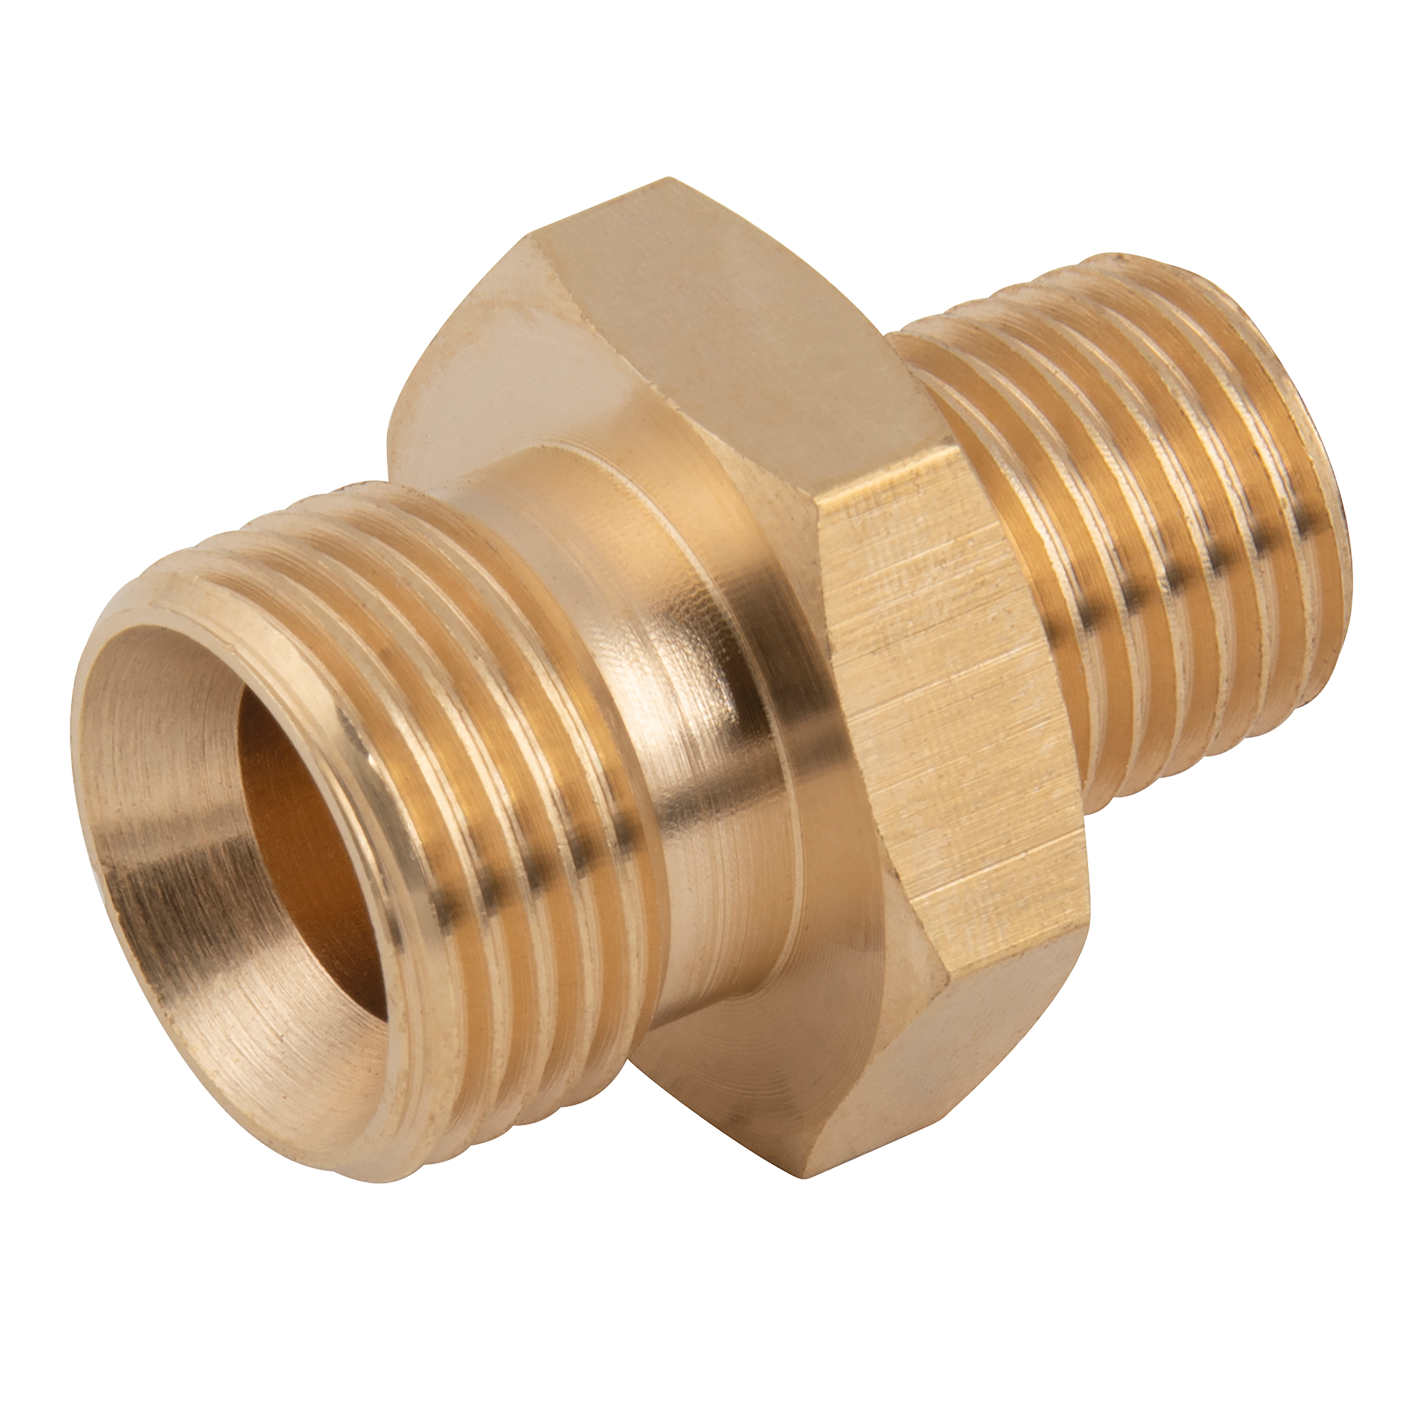 1/2" BSPP Male x 3/4" BSPT Male Unequal Adaptor